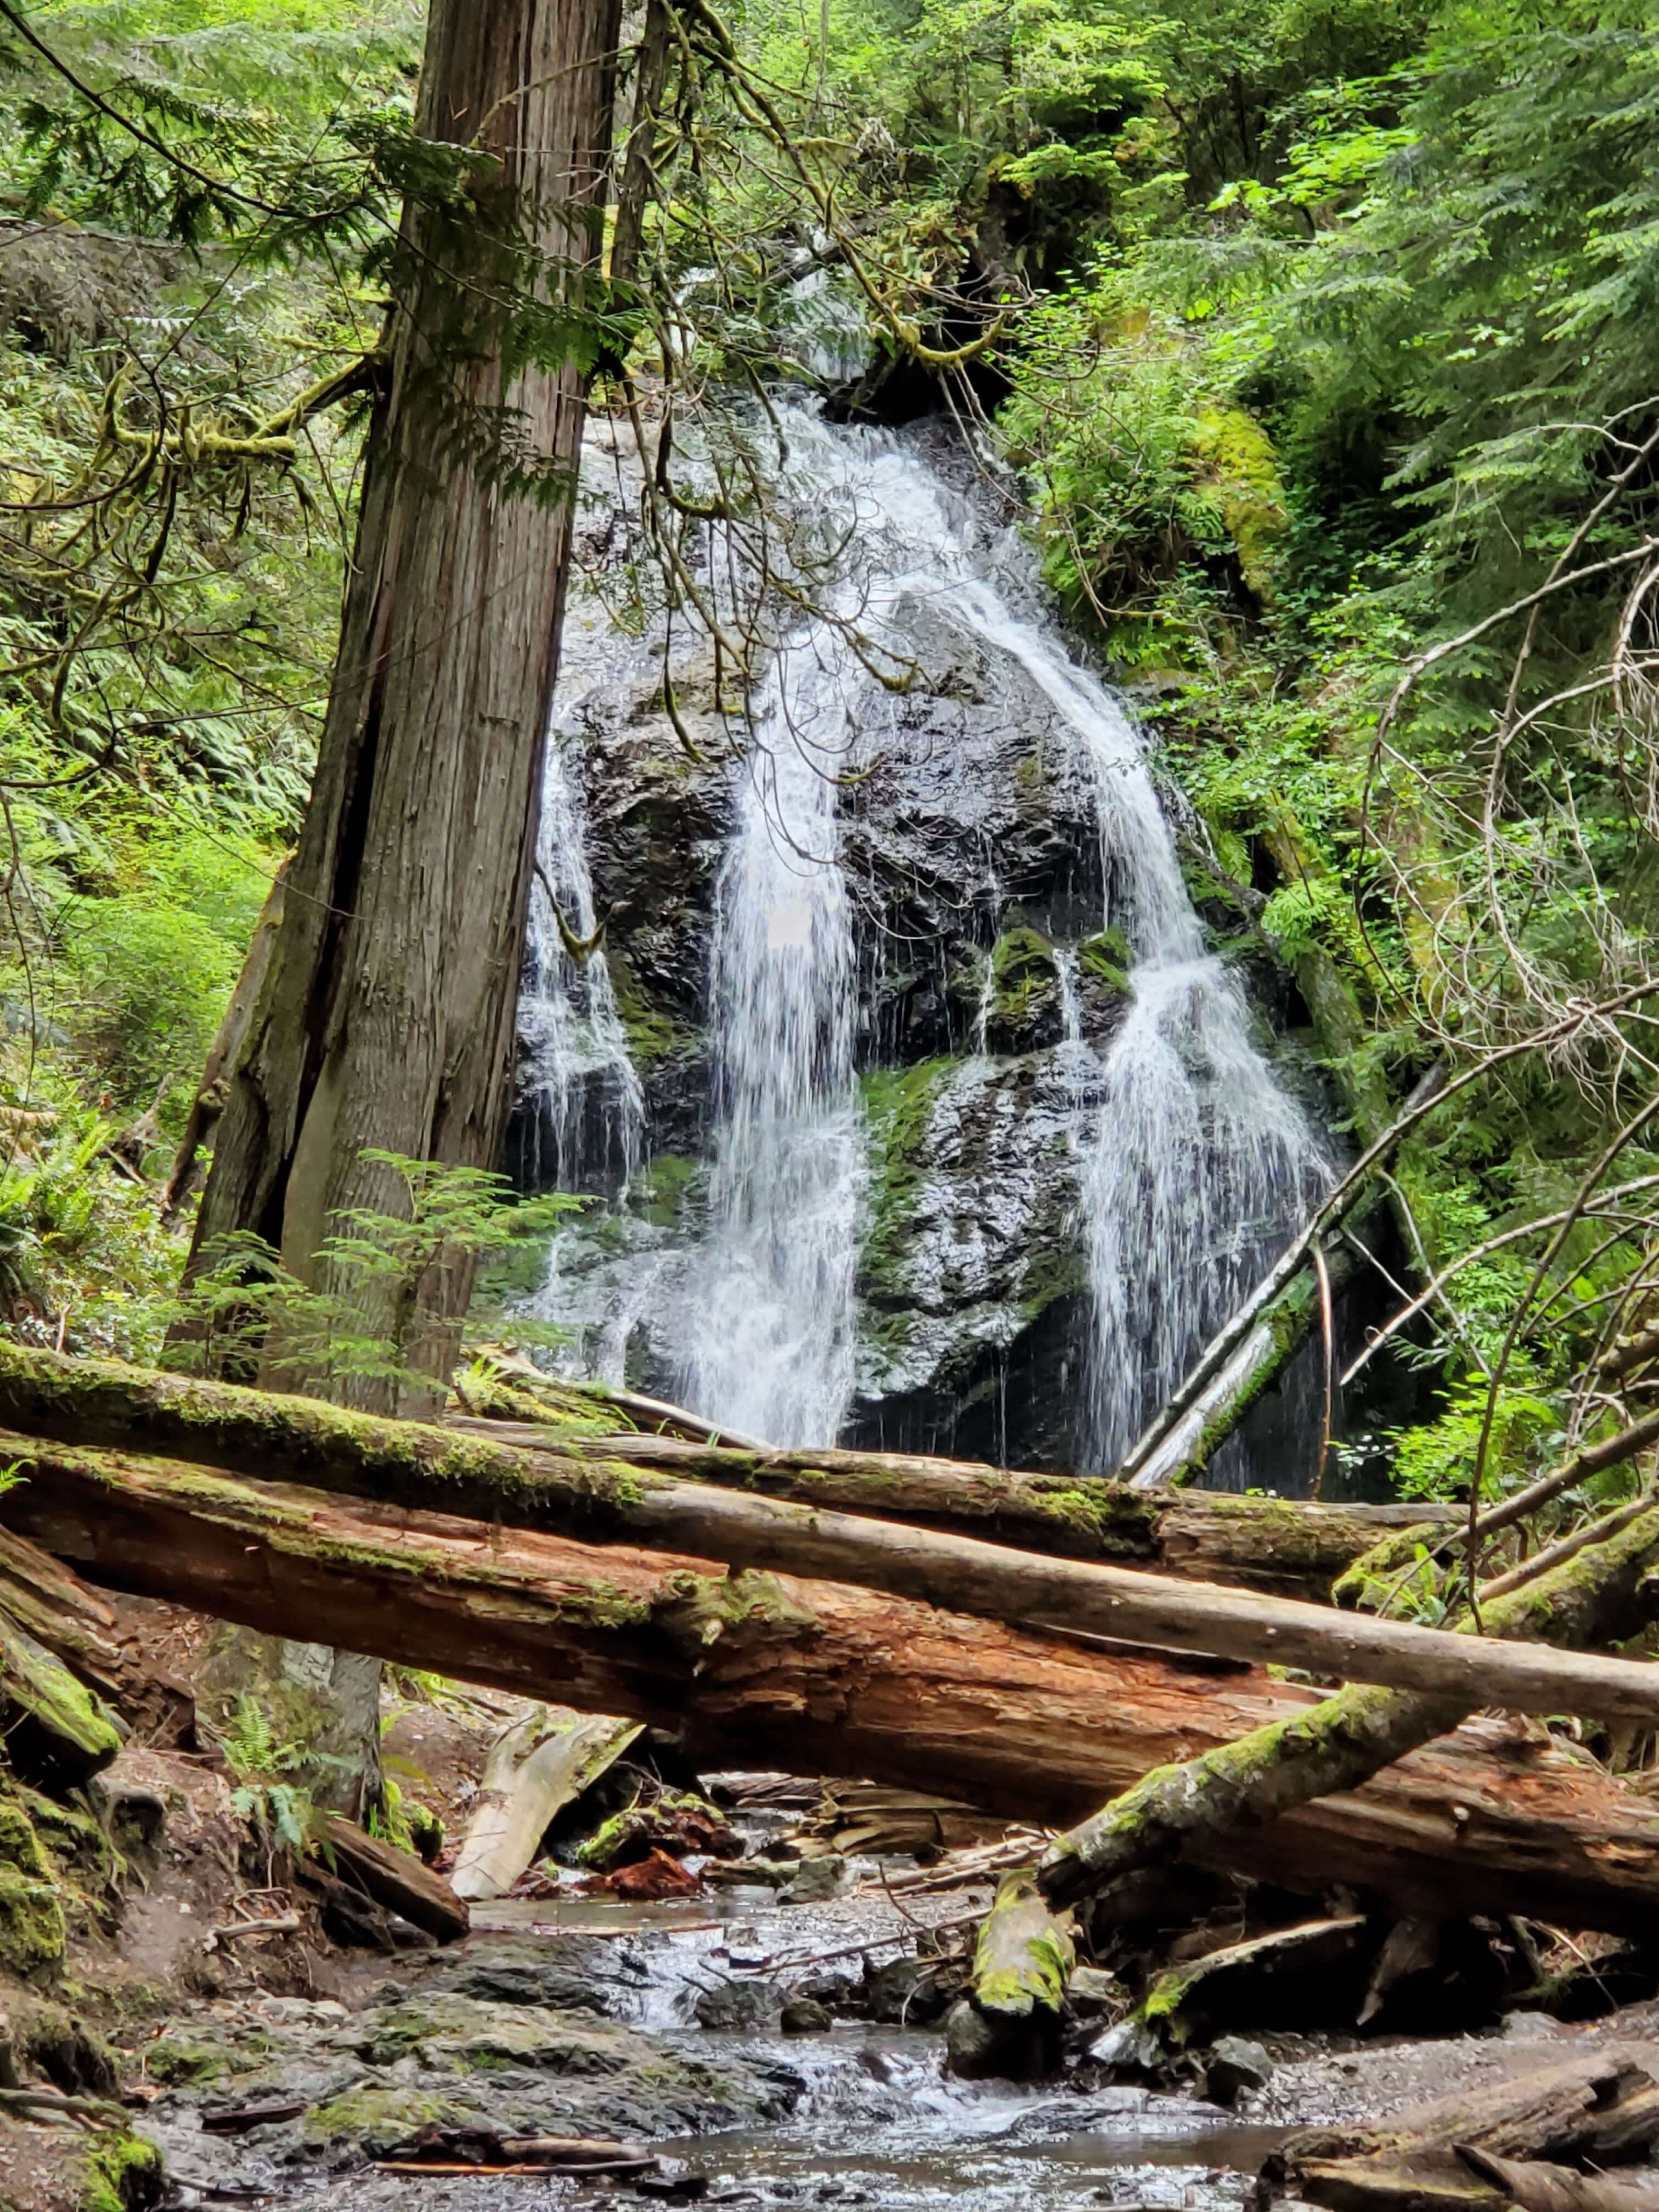 Cascade Falls as seen from the lower viewpoint in Moran State Park on Orcas Island